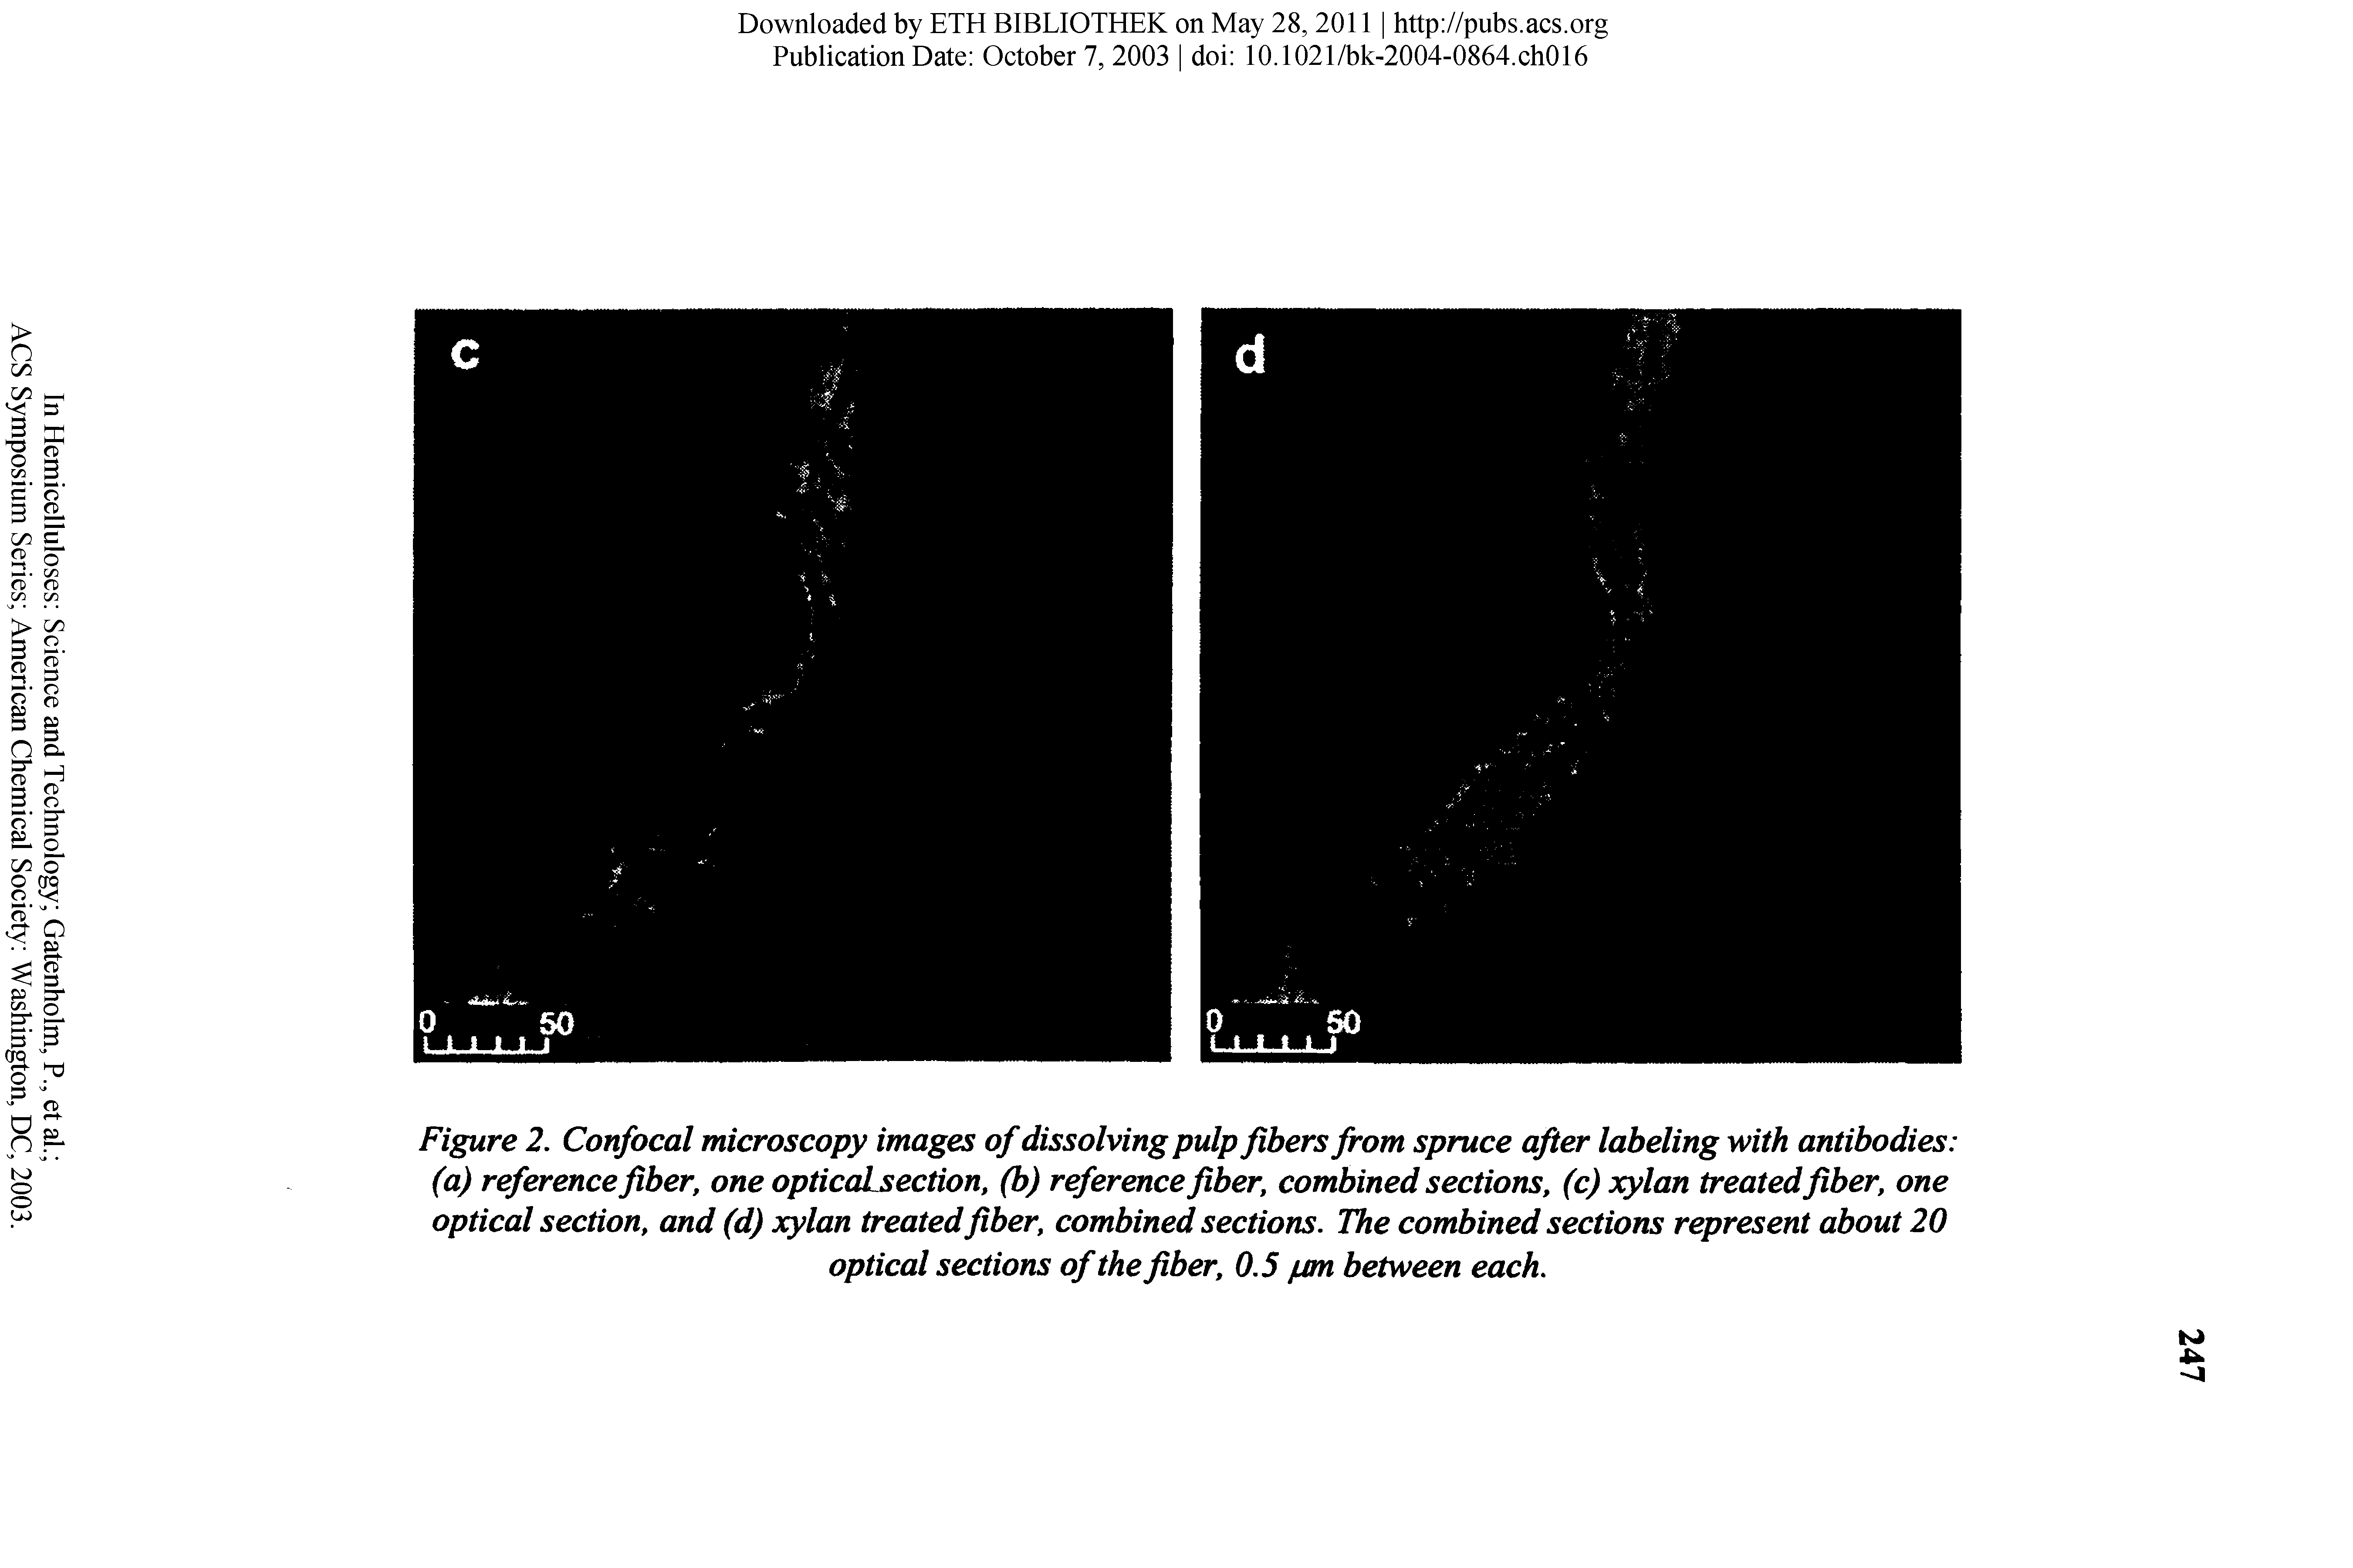 Figure 2. Confocal microscopy images of dissolving pulp fibers from spruce after labeling with antibodies (a) reference fiber, one opticaLsection, (b) reference fiber, combined sections, (c) xylan treatedfiber, one optical section, and (d) xylan treated fiber, combined sections. The combined sections represent about 20...